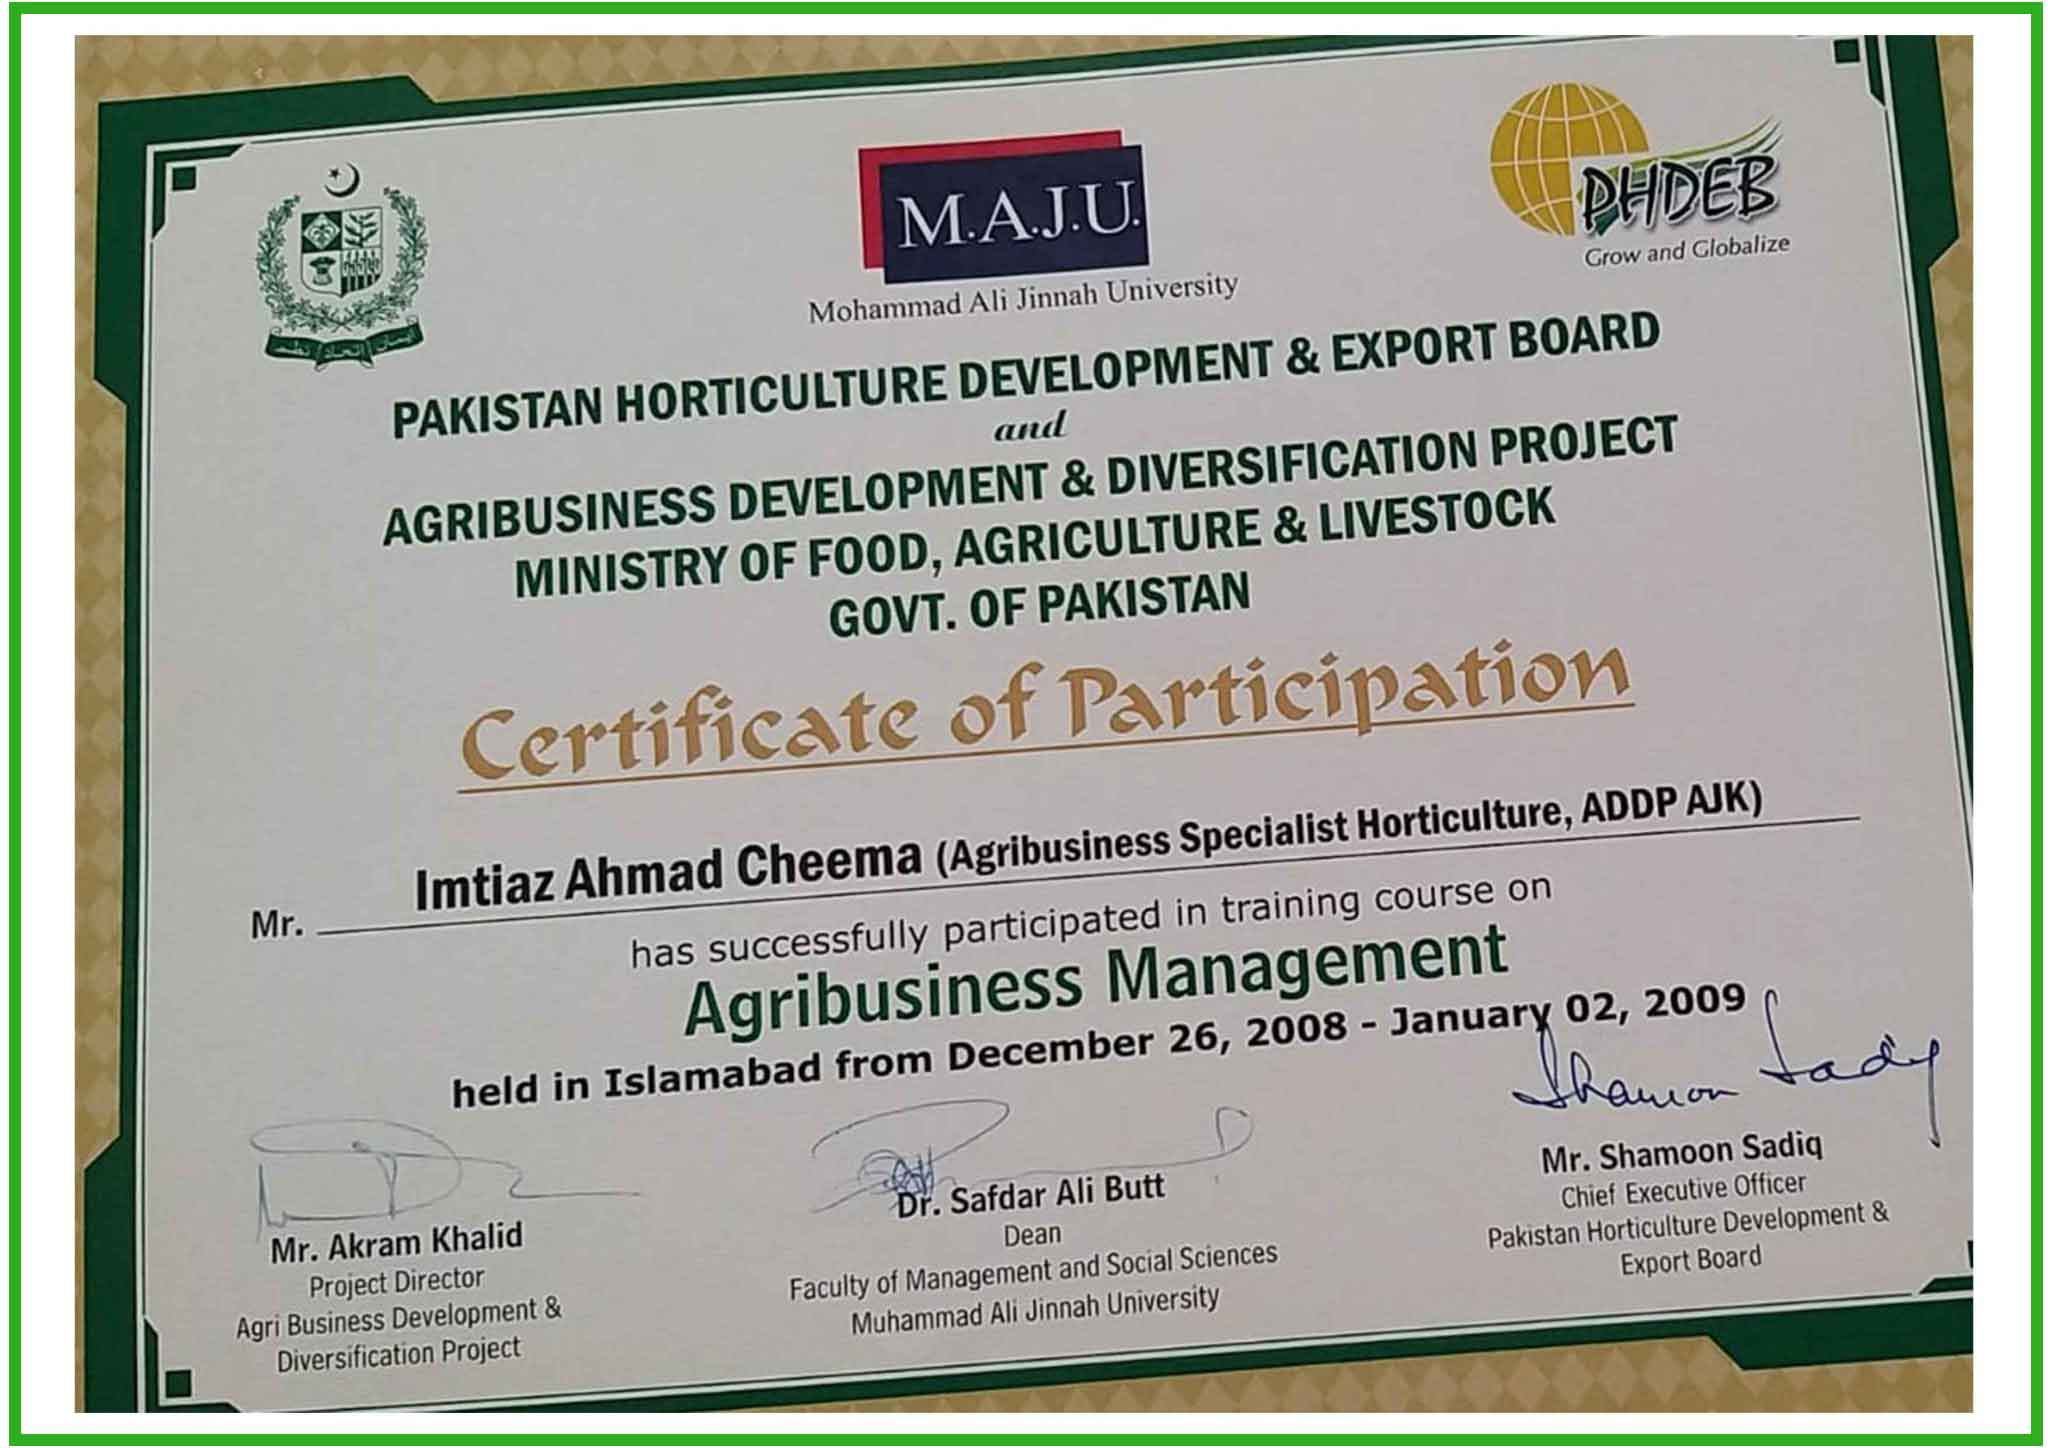 Agribusiness Specialist Horticulture ADDP AJK Pestinil Certifications